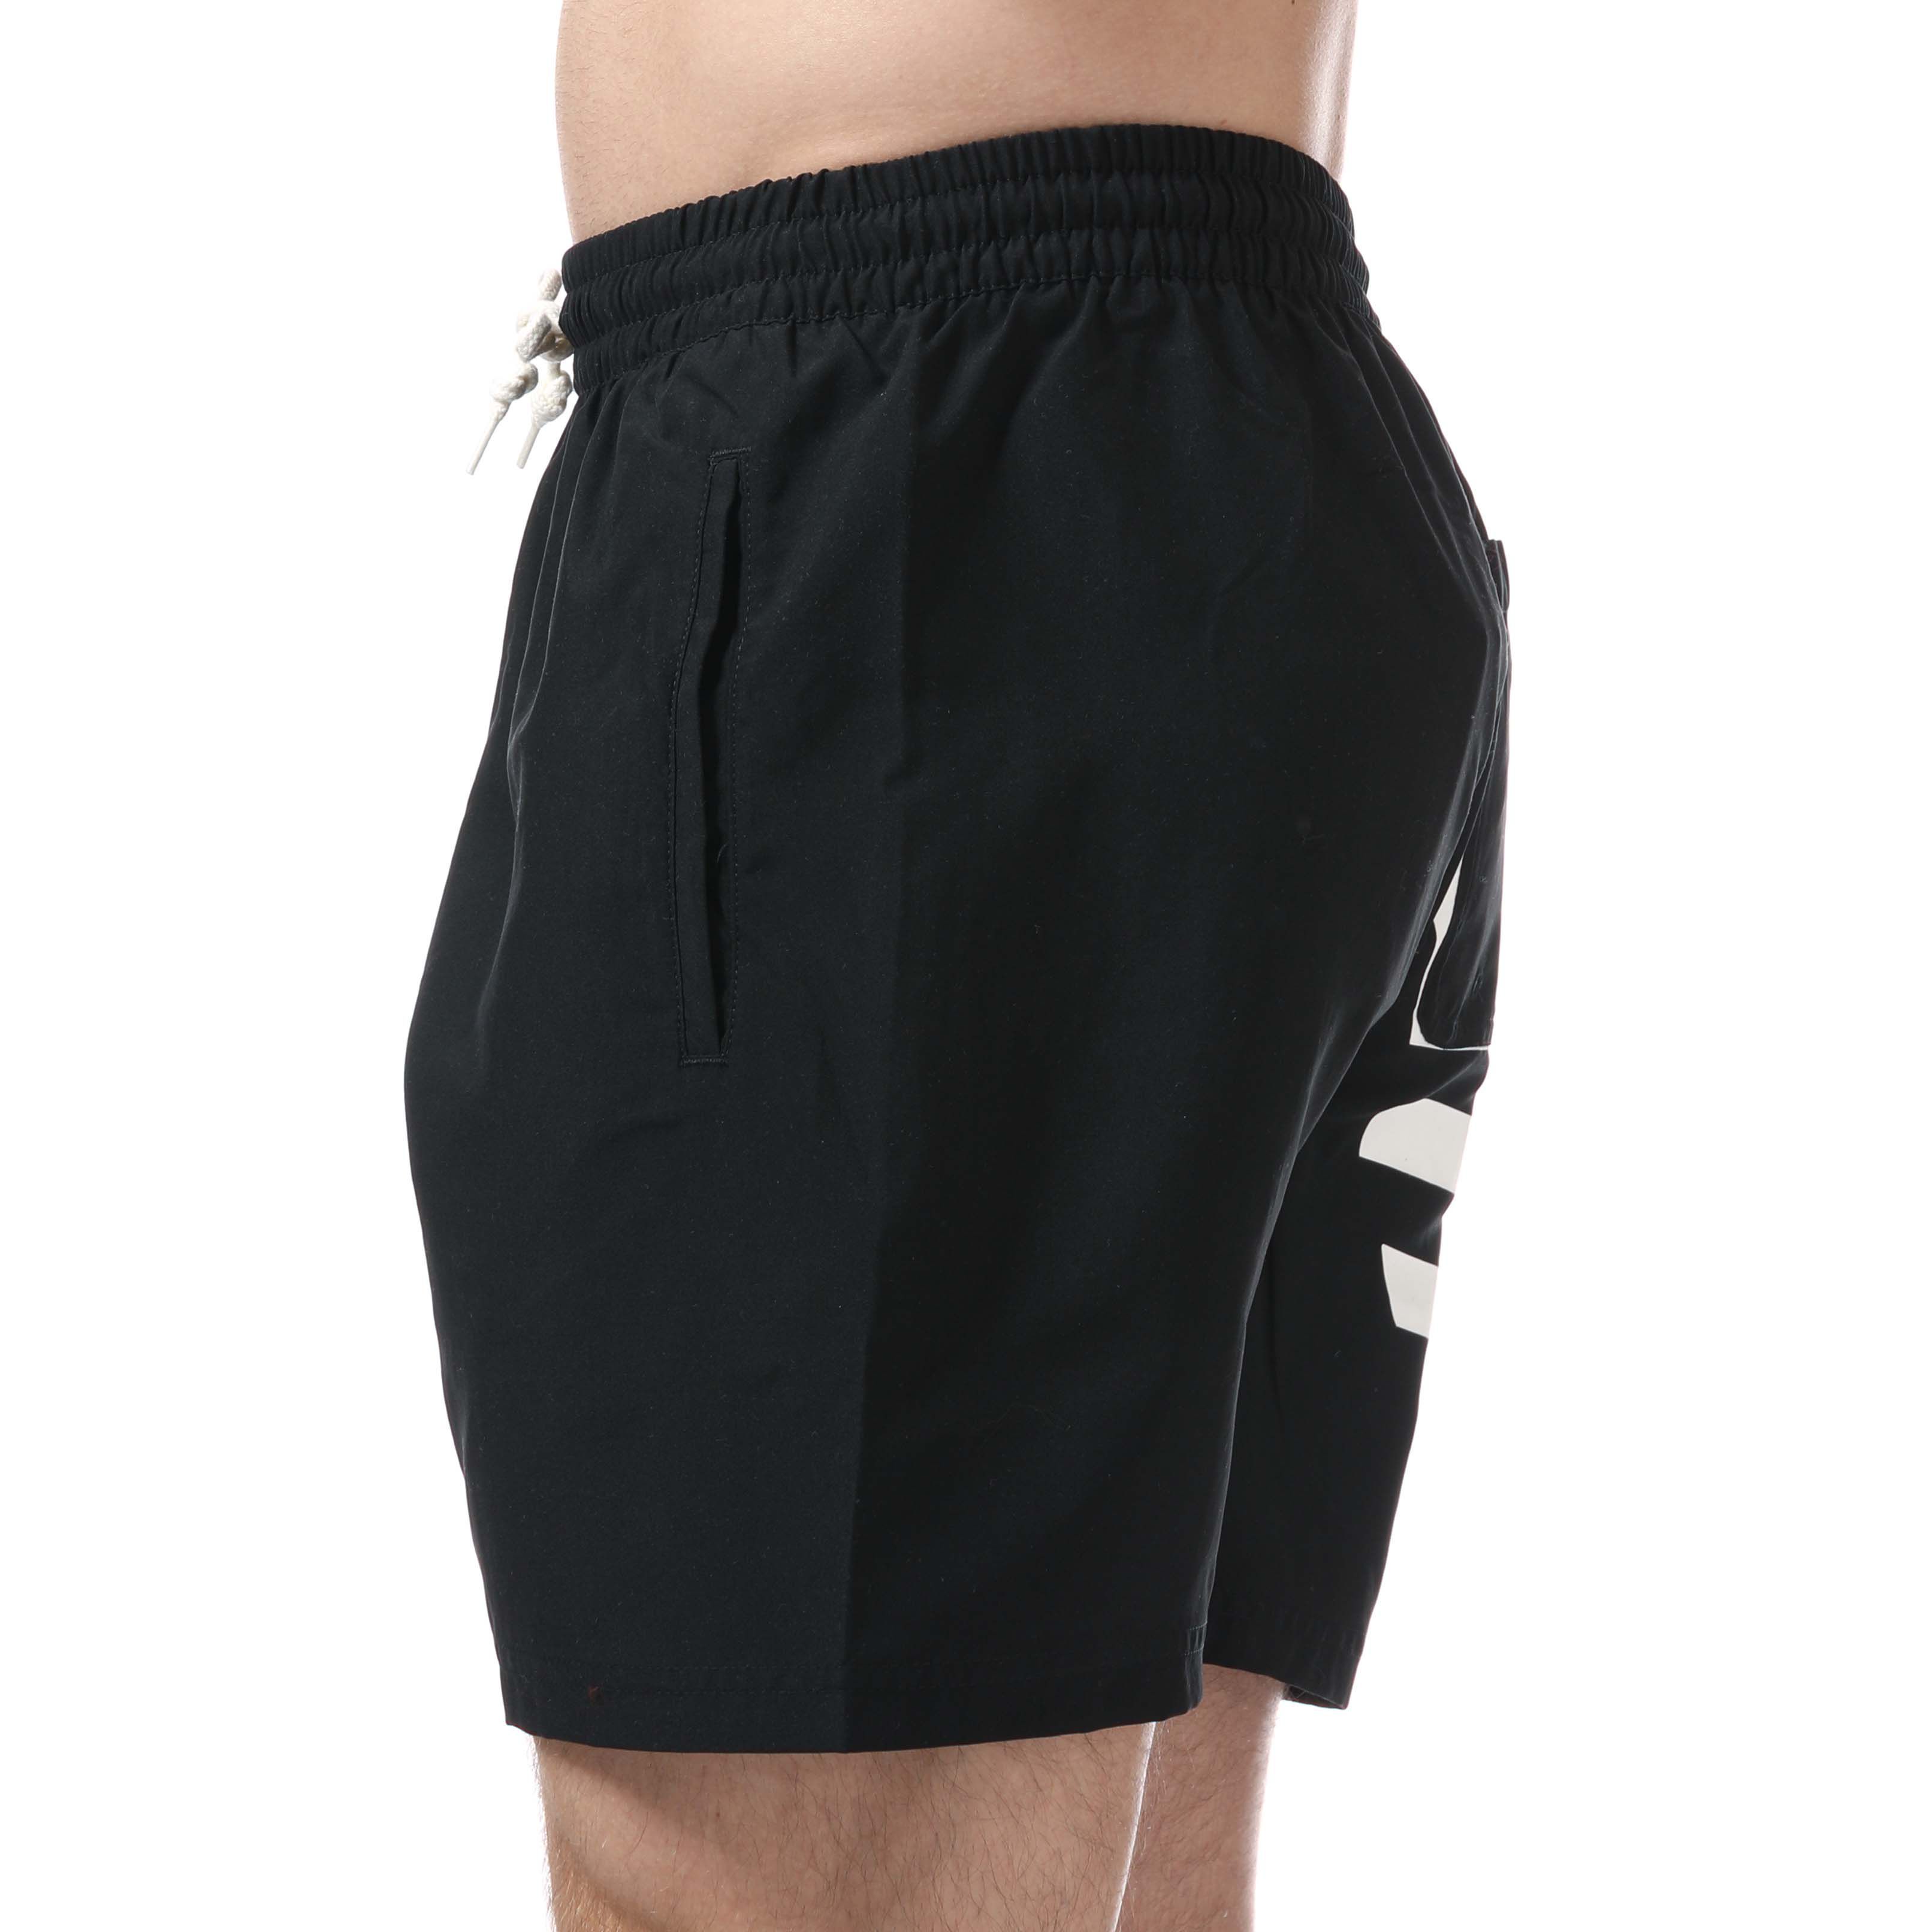 Mens adidas Originals Big Trefoil Swim Shorts in black.- Elasticated waist with drawstring adjustment.- Dual side pockets with secure zipper closure and wallet pocket to back.- Contrast adidas Originals Trefoil branding to side and back pocket.- Mesh inner briefs.- Regular fit.- Main material: 100% Polyester.- Ref: FM9911